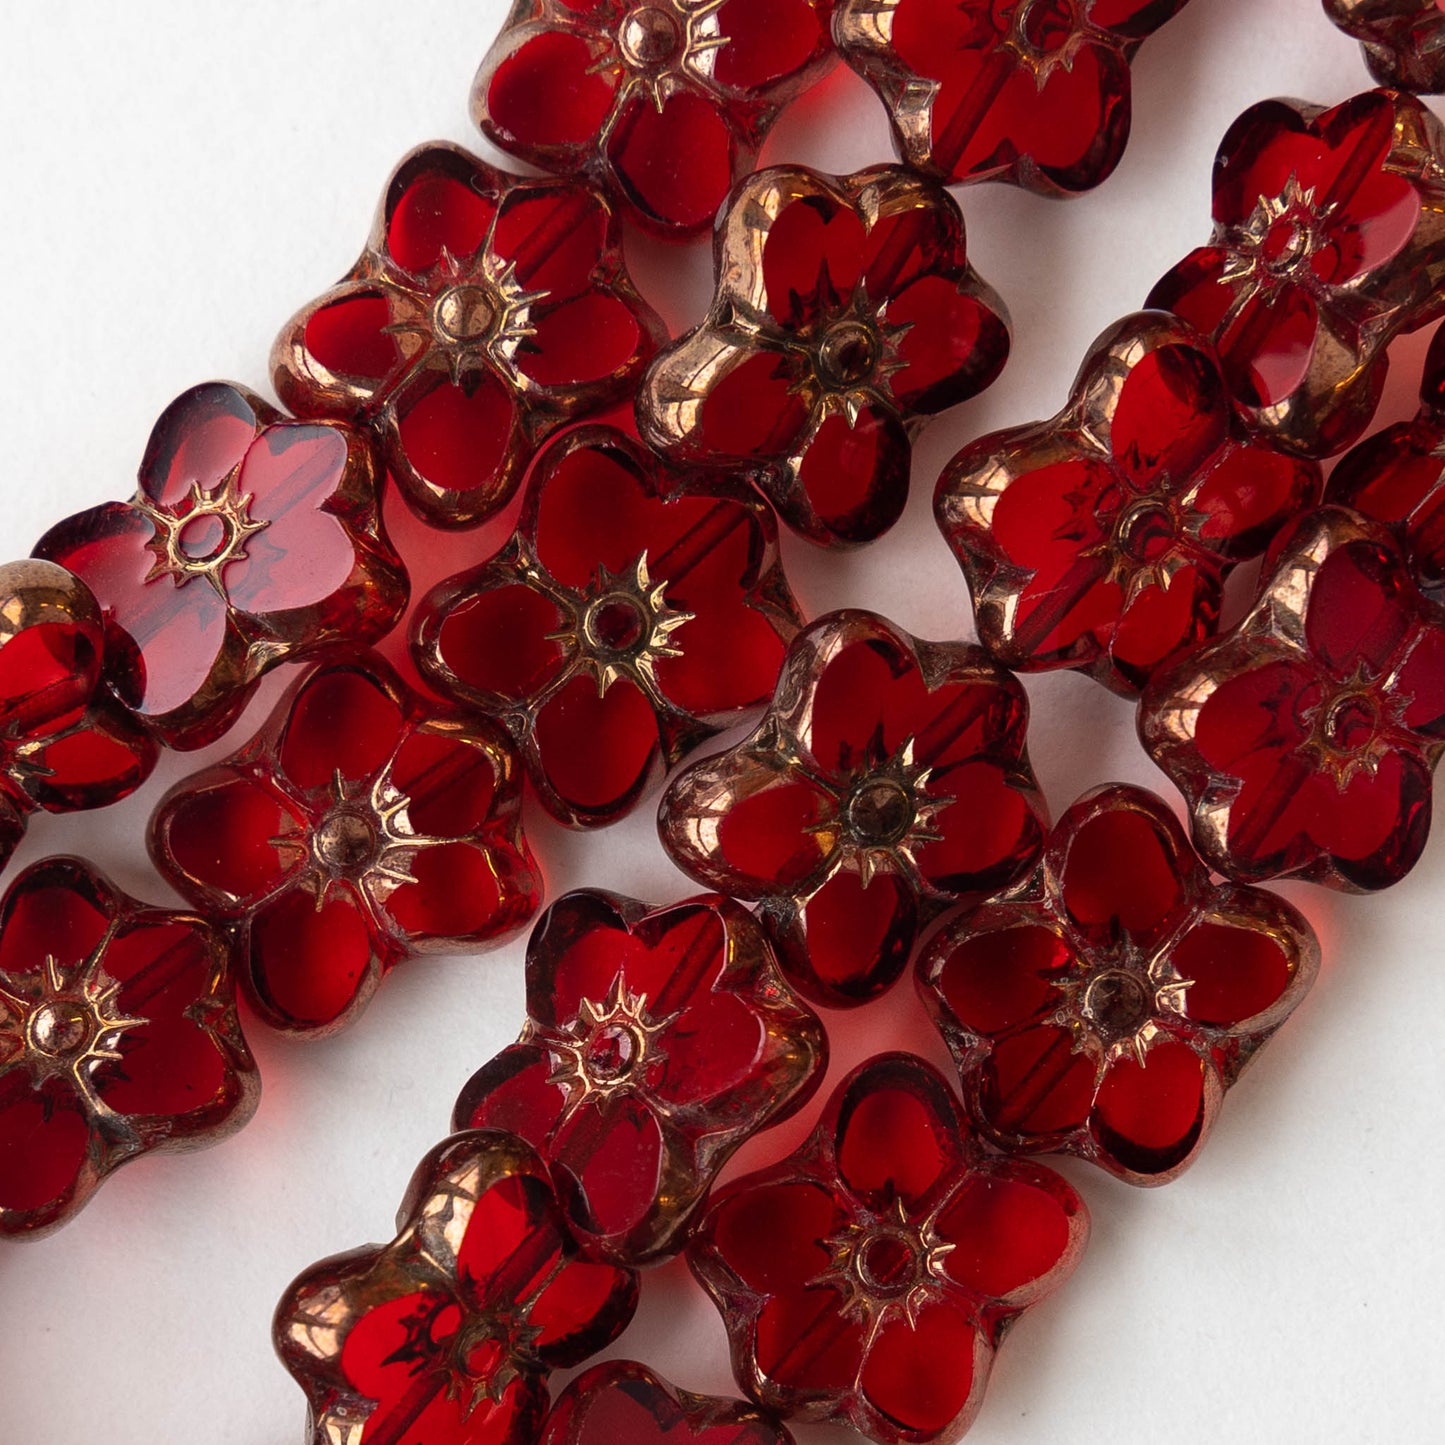 12x14mm Flower Beads - Ruby Red with Copper Wash - 10 Beads –  funkyprettybeads